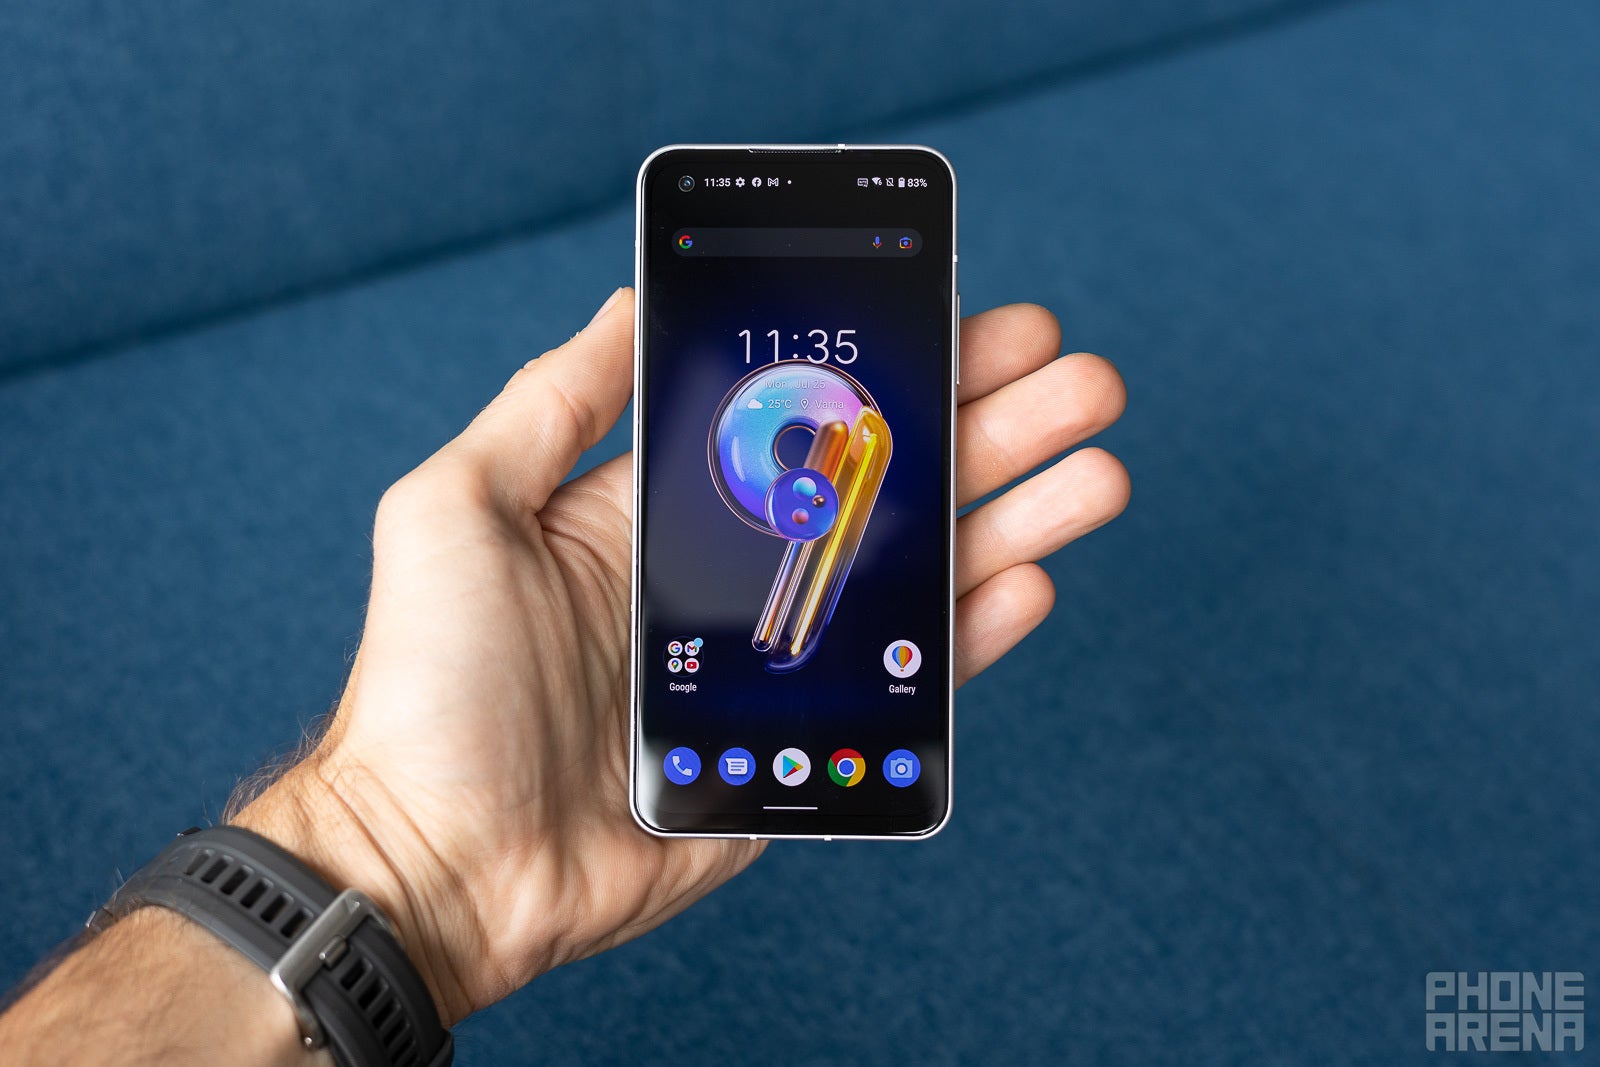 (Image Credit - PhoneArena) The Zenfone 9 manages to fit a flagship processor in a tiny body - This unassuming new phone exposes the hypocrisy of modern iPhone and Galaxy flagships